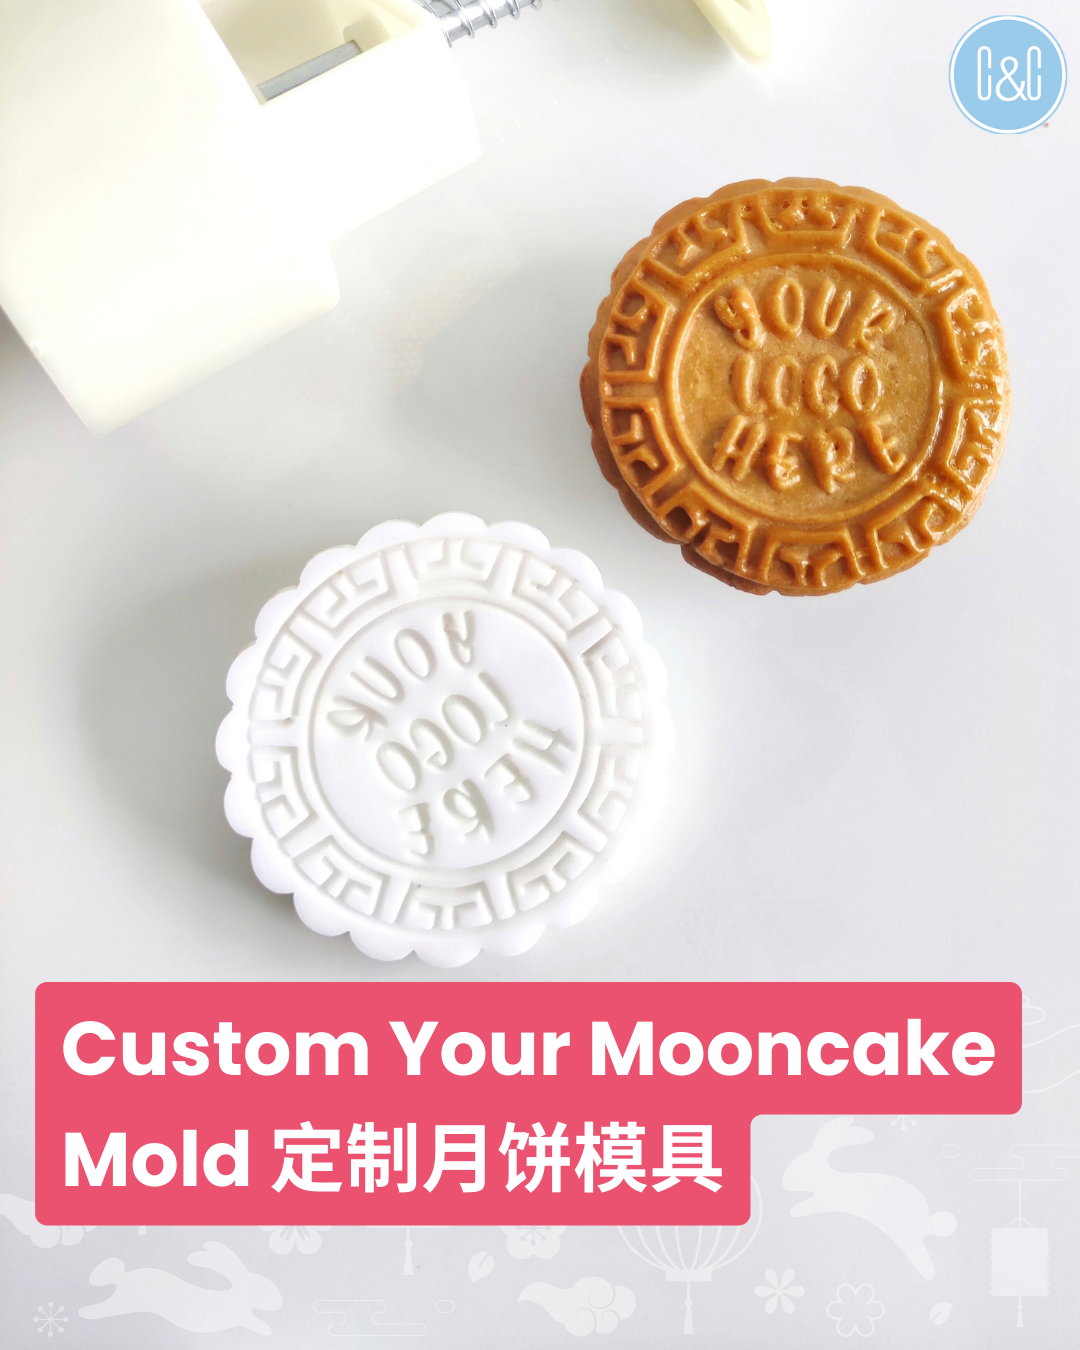 Amazon.com: ZUNTENG Mooncake Press Molds,Mid Autumn Festival Mooncake Mold  Set 50g Flower Moon Cake Mold with 6Pcs Stamps (White): Home & Kitchen